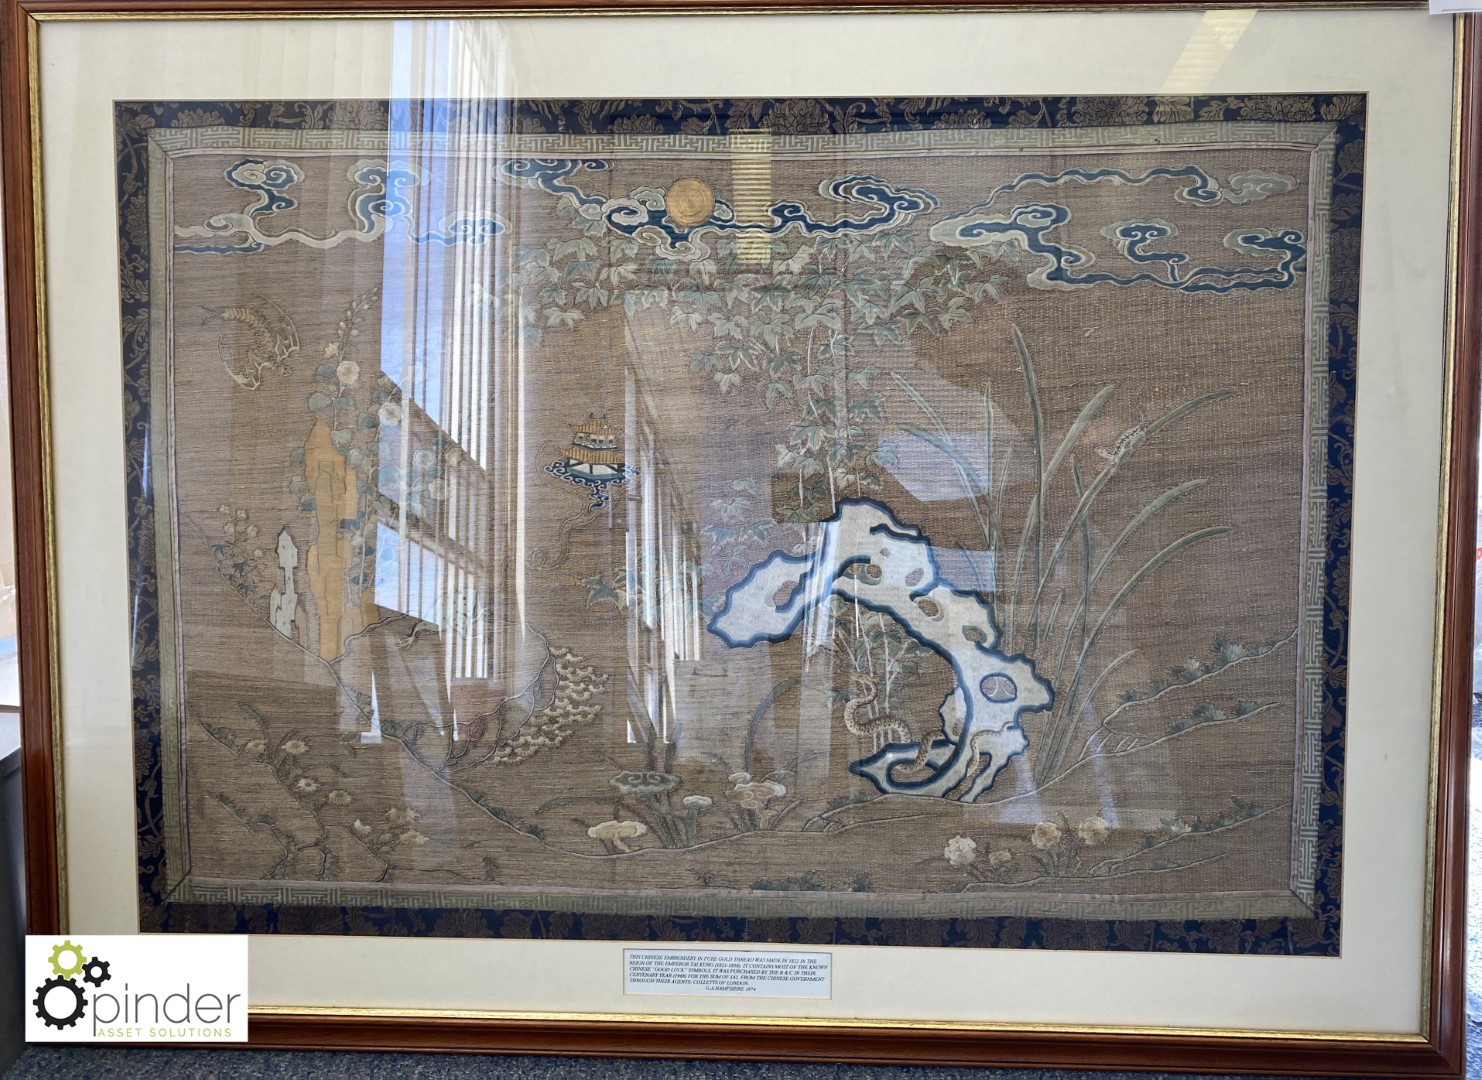 Framed and glazed Chinese Embroidery in pure gold thread, made in 1822, containing many Chinese good